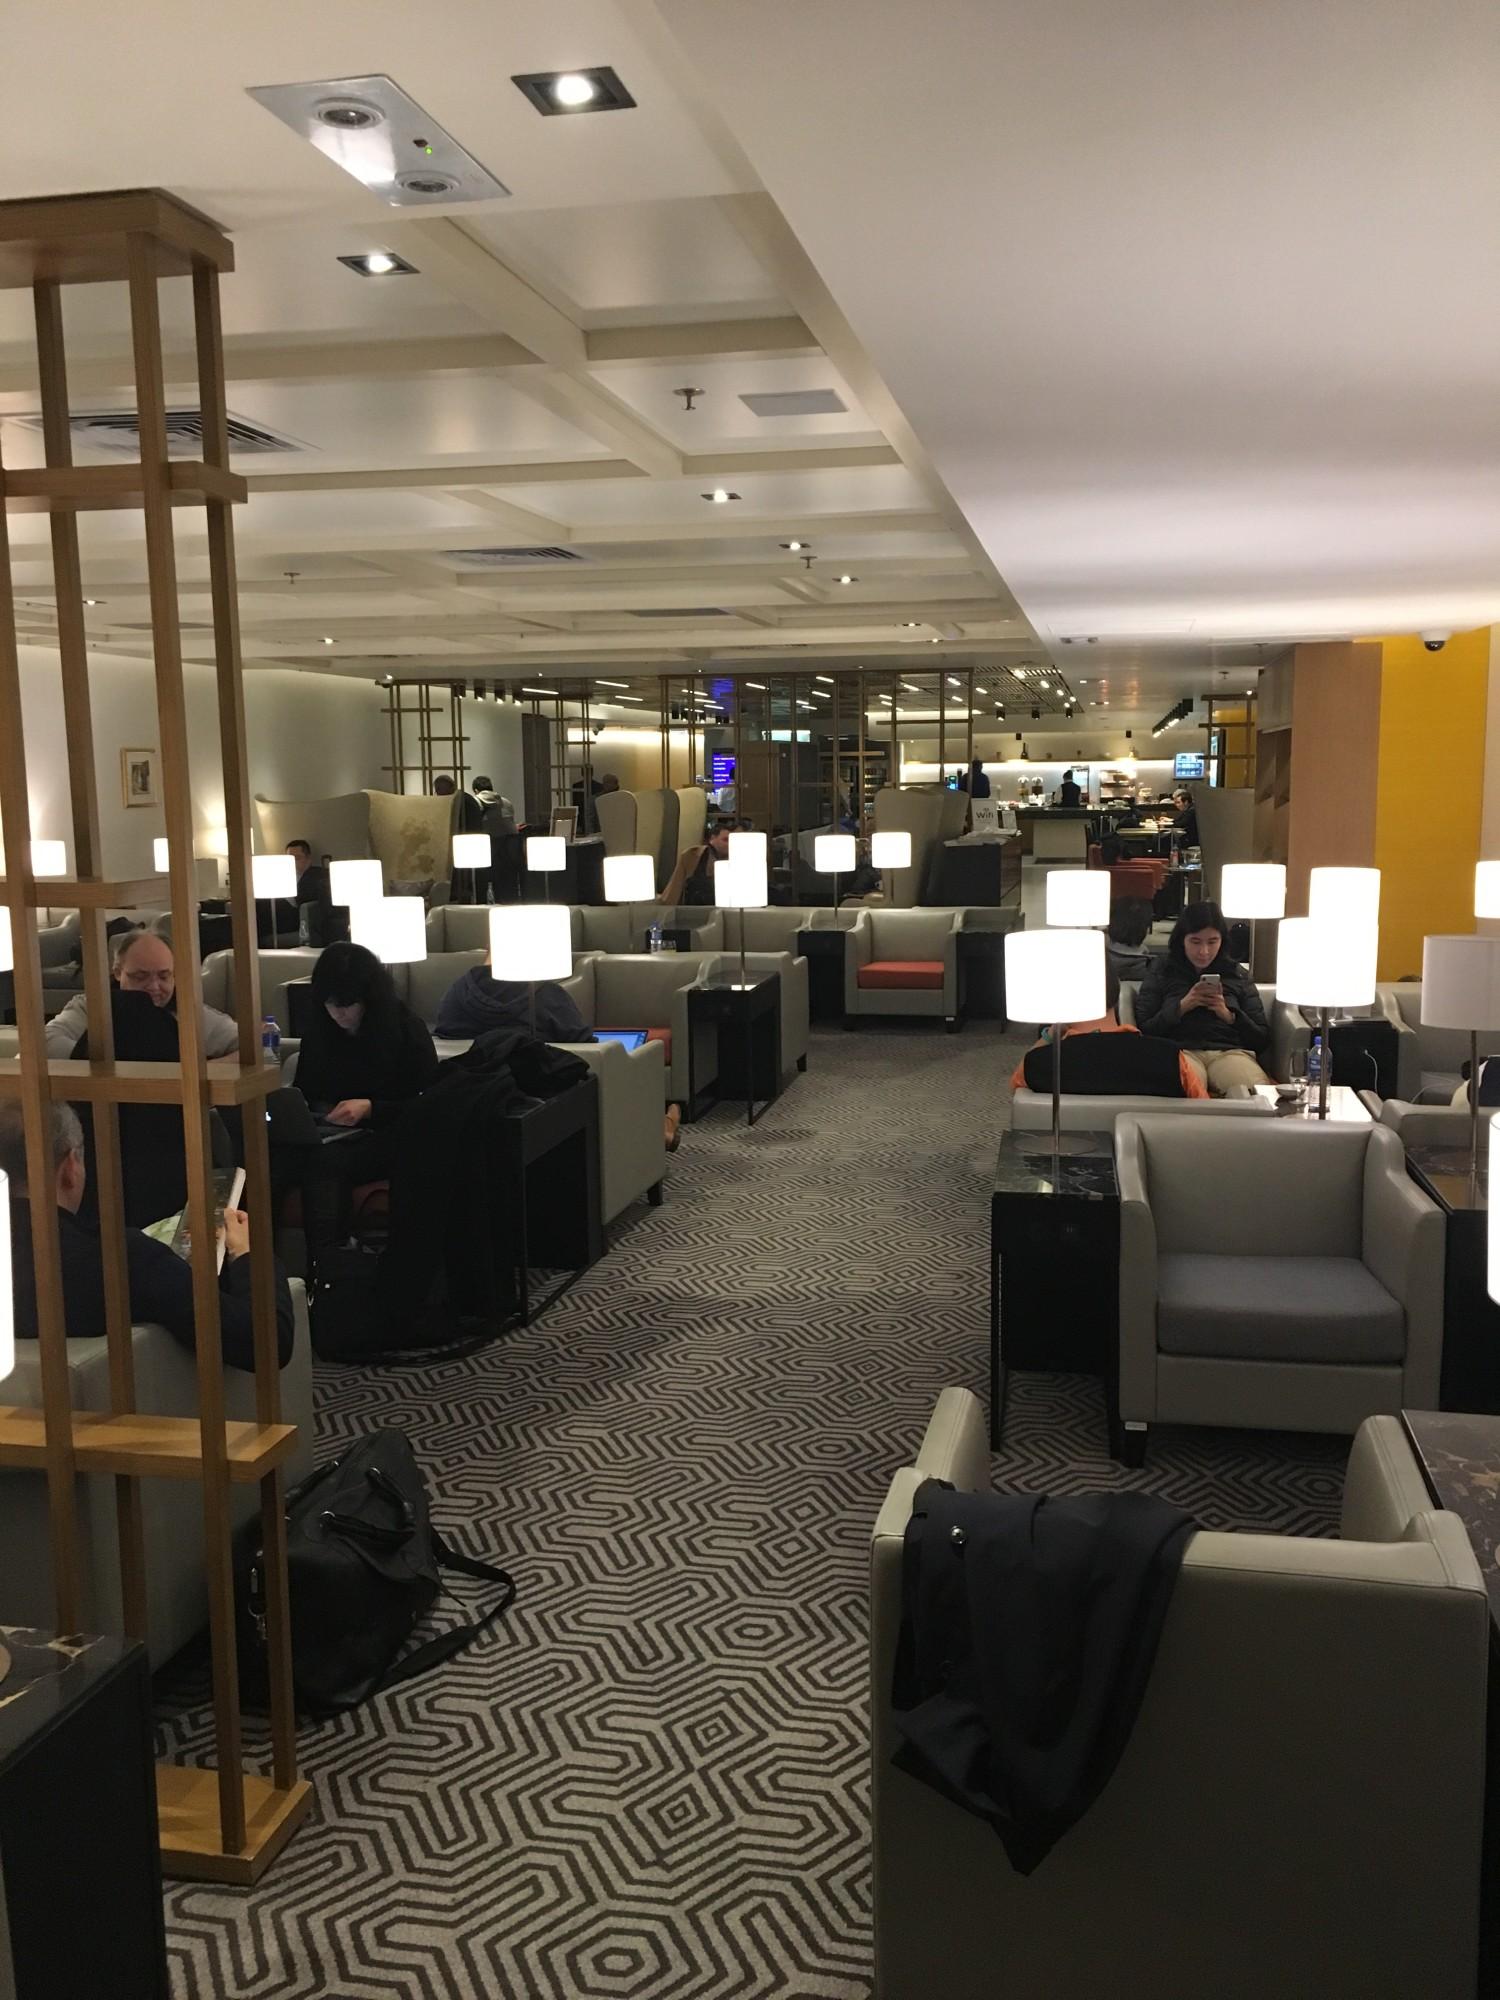 Singapore Airlines SilverKris Business Class Lounge image 47 of 68